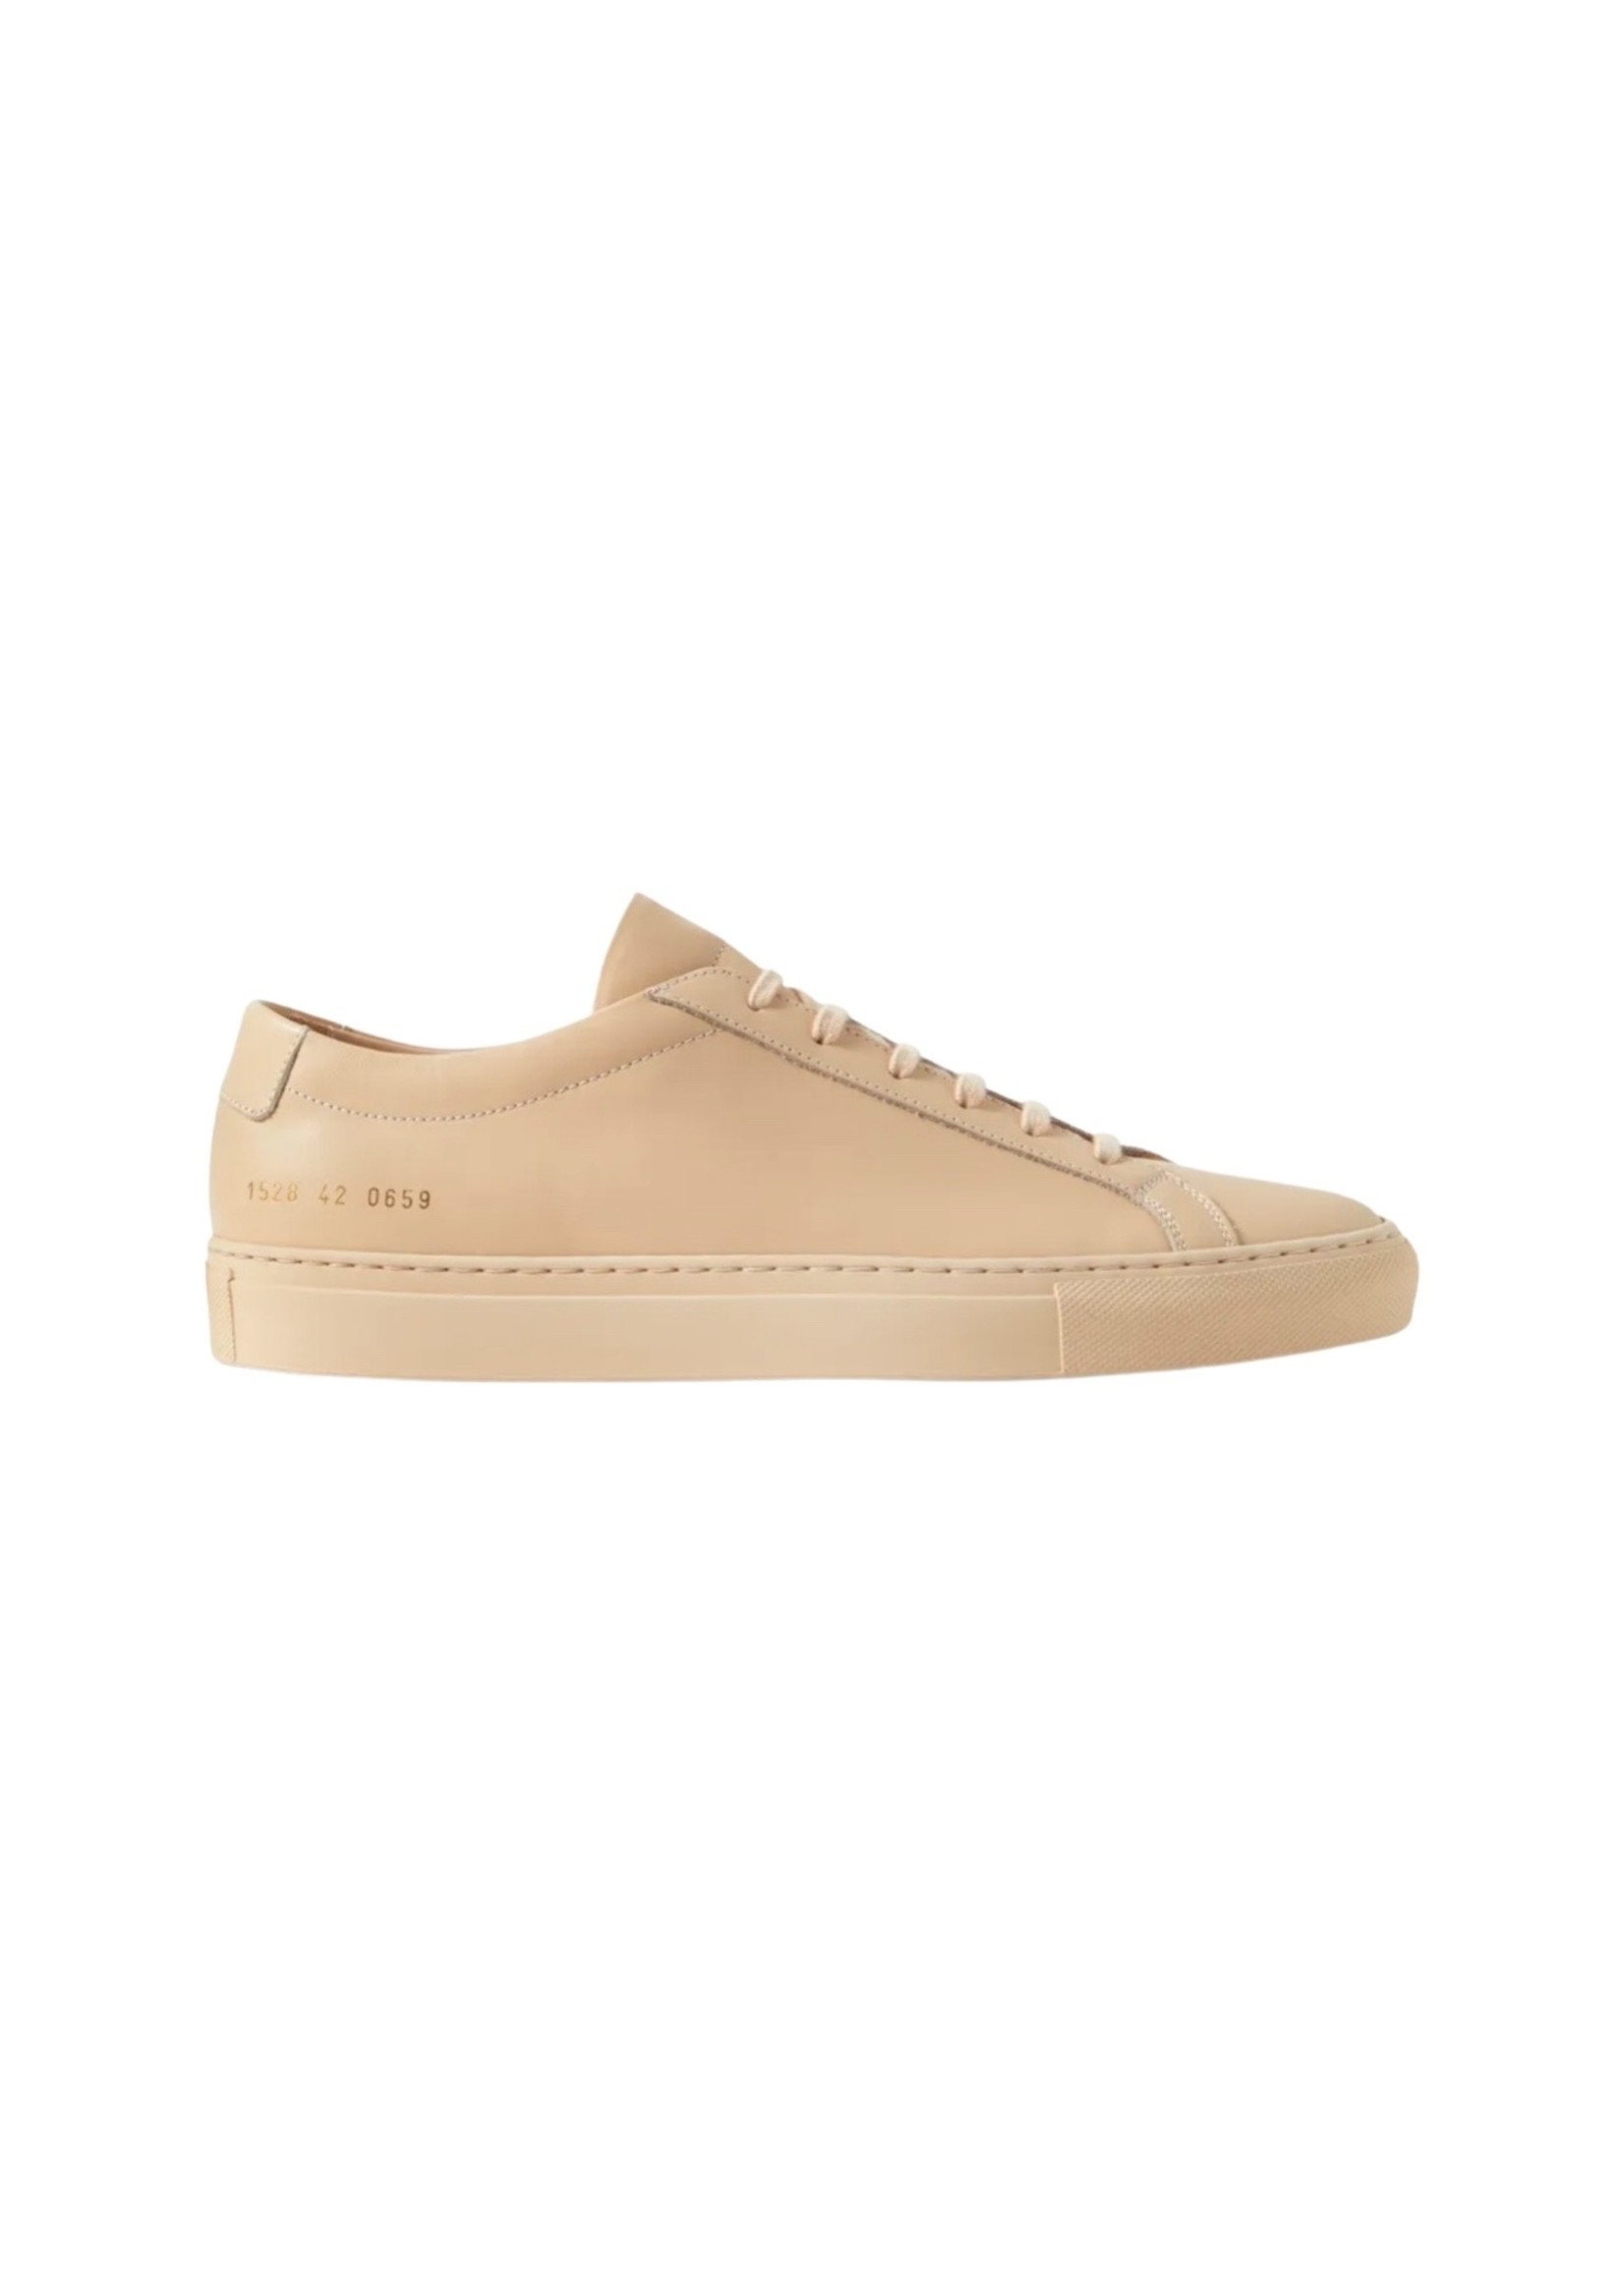 COMMON PROJECTS ACHILLES LOW IN NAPA LEATHER